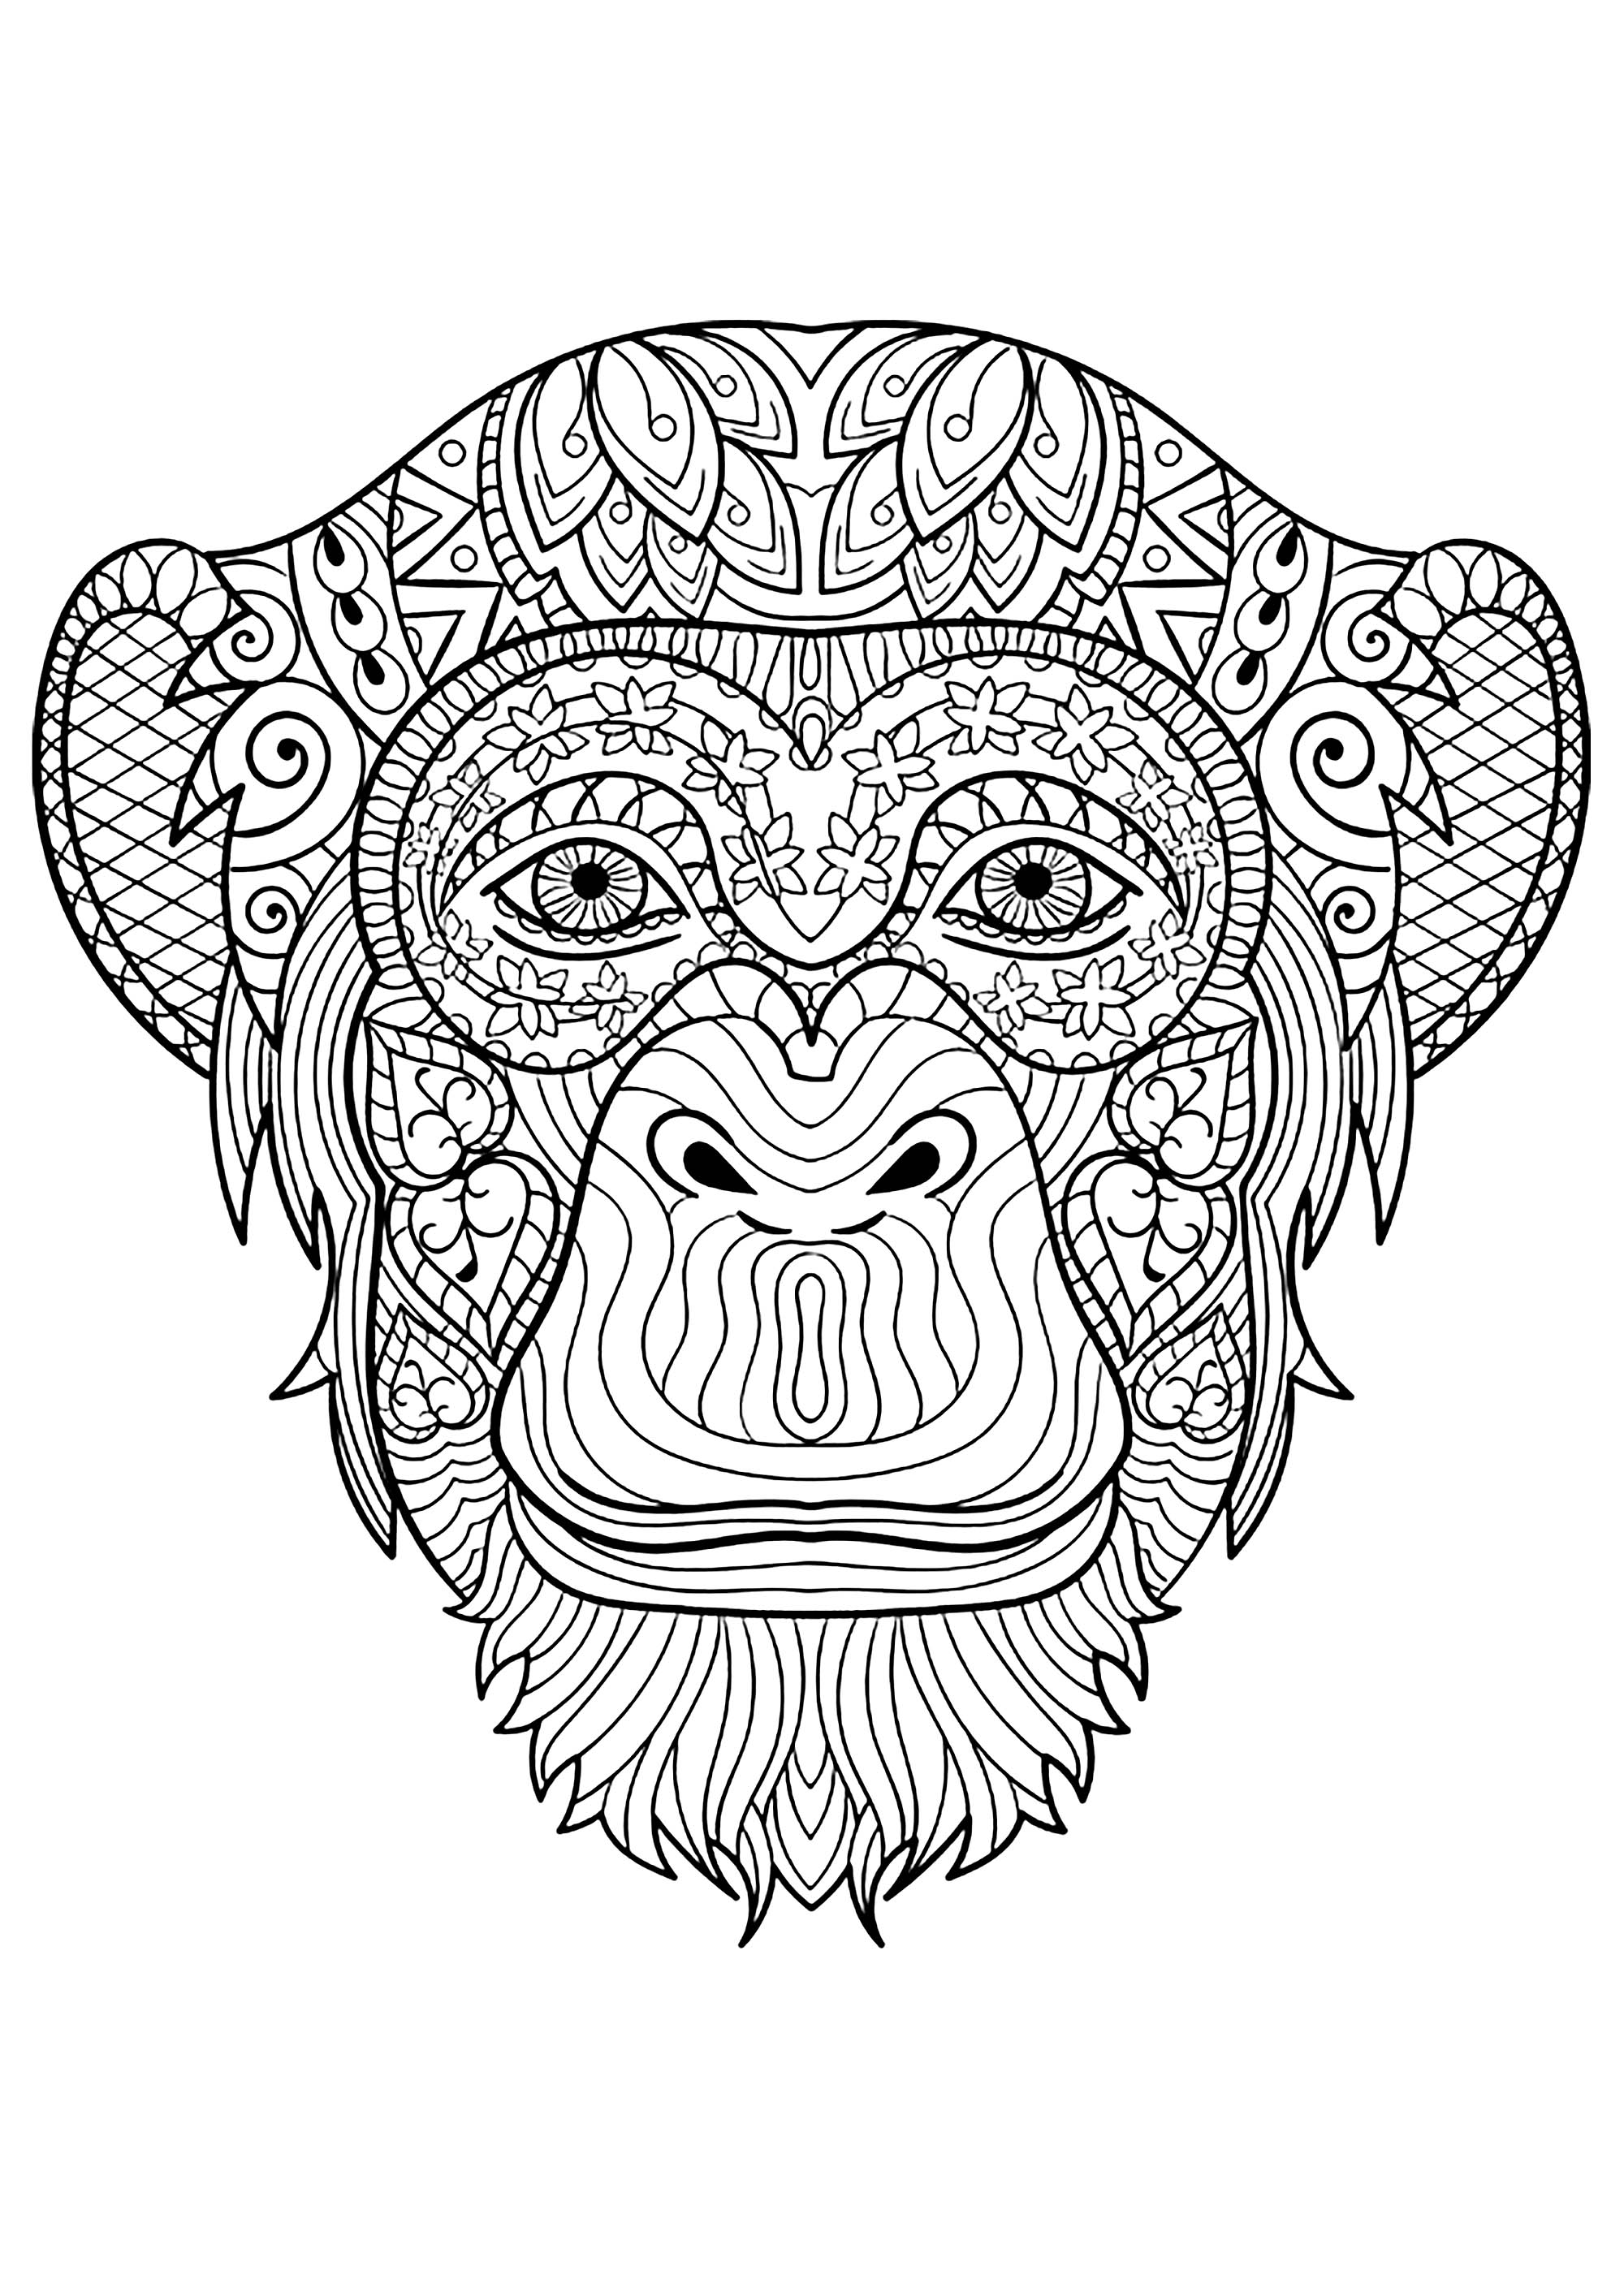 ape coloring page